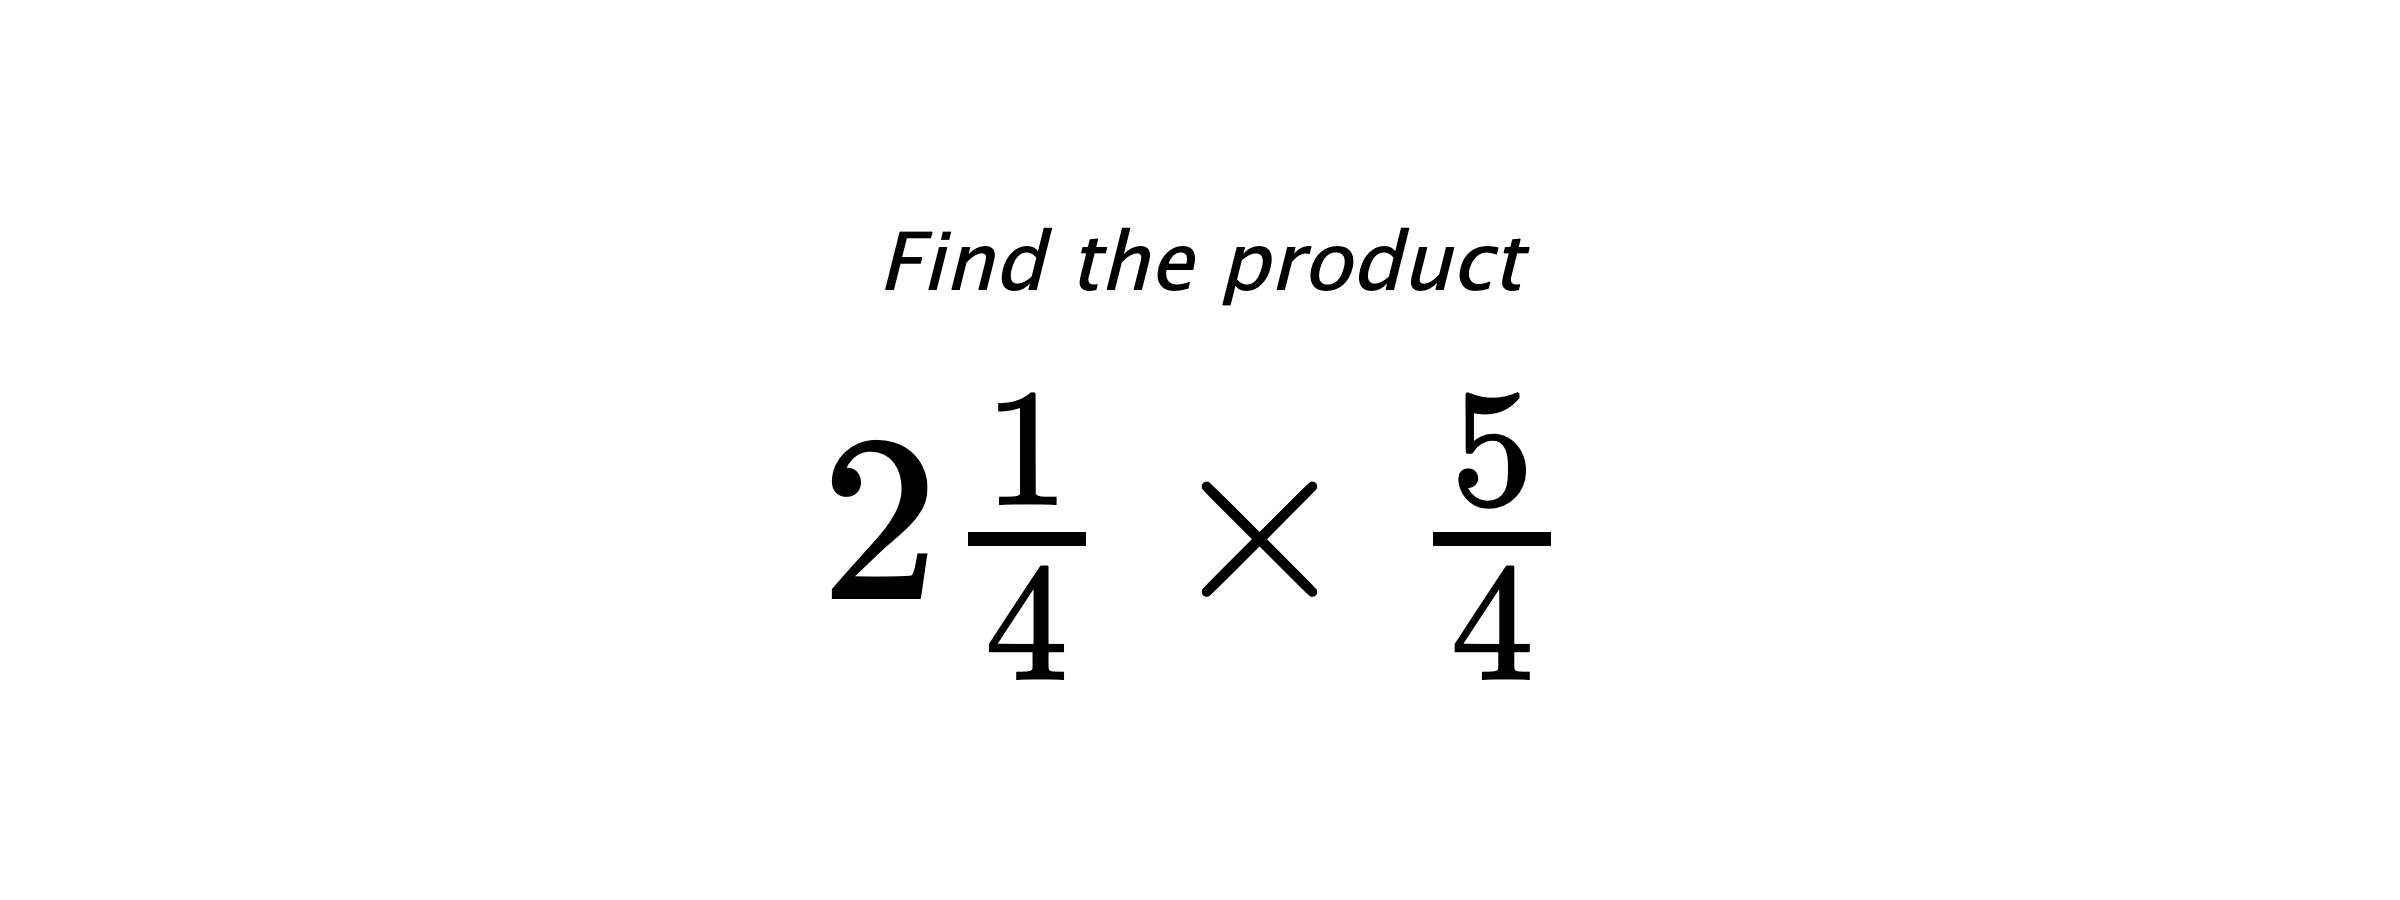 Find the product $ 2\frac{1}{4} \times \frac{5}{4} $